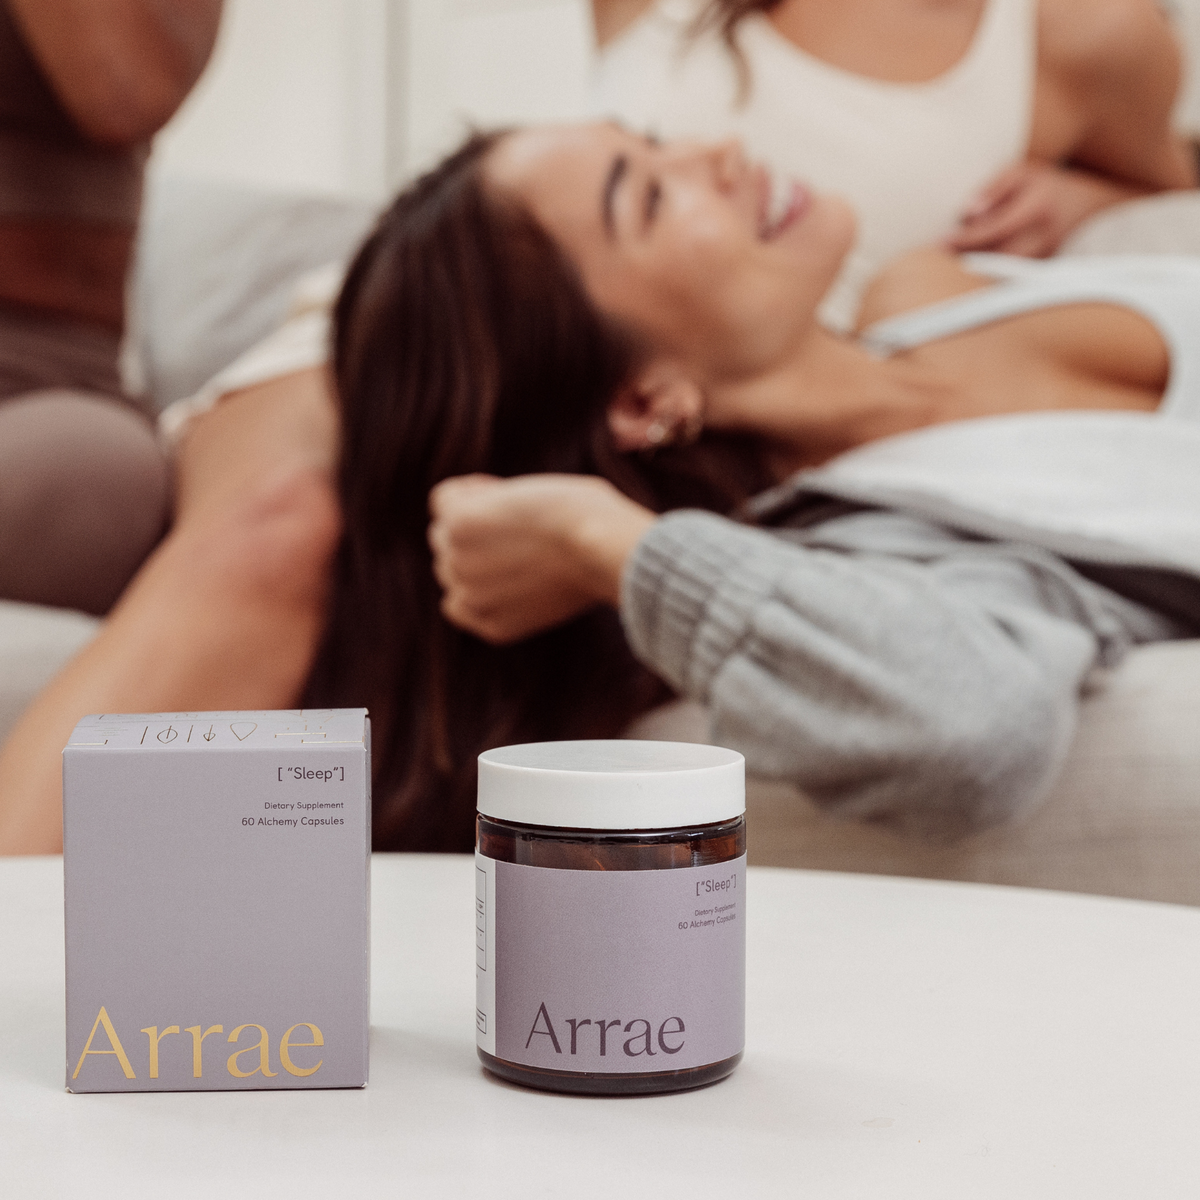 Arrae Sleep Supplement jar & box - A bottle of 60 capsules featuring a blend of natural ingredients, designed to promote restful sleep and relaxation without melatonin.